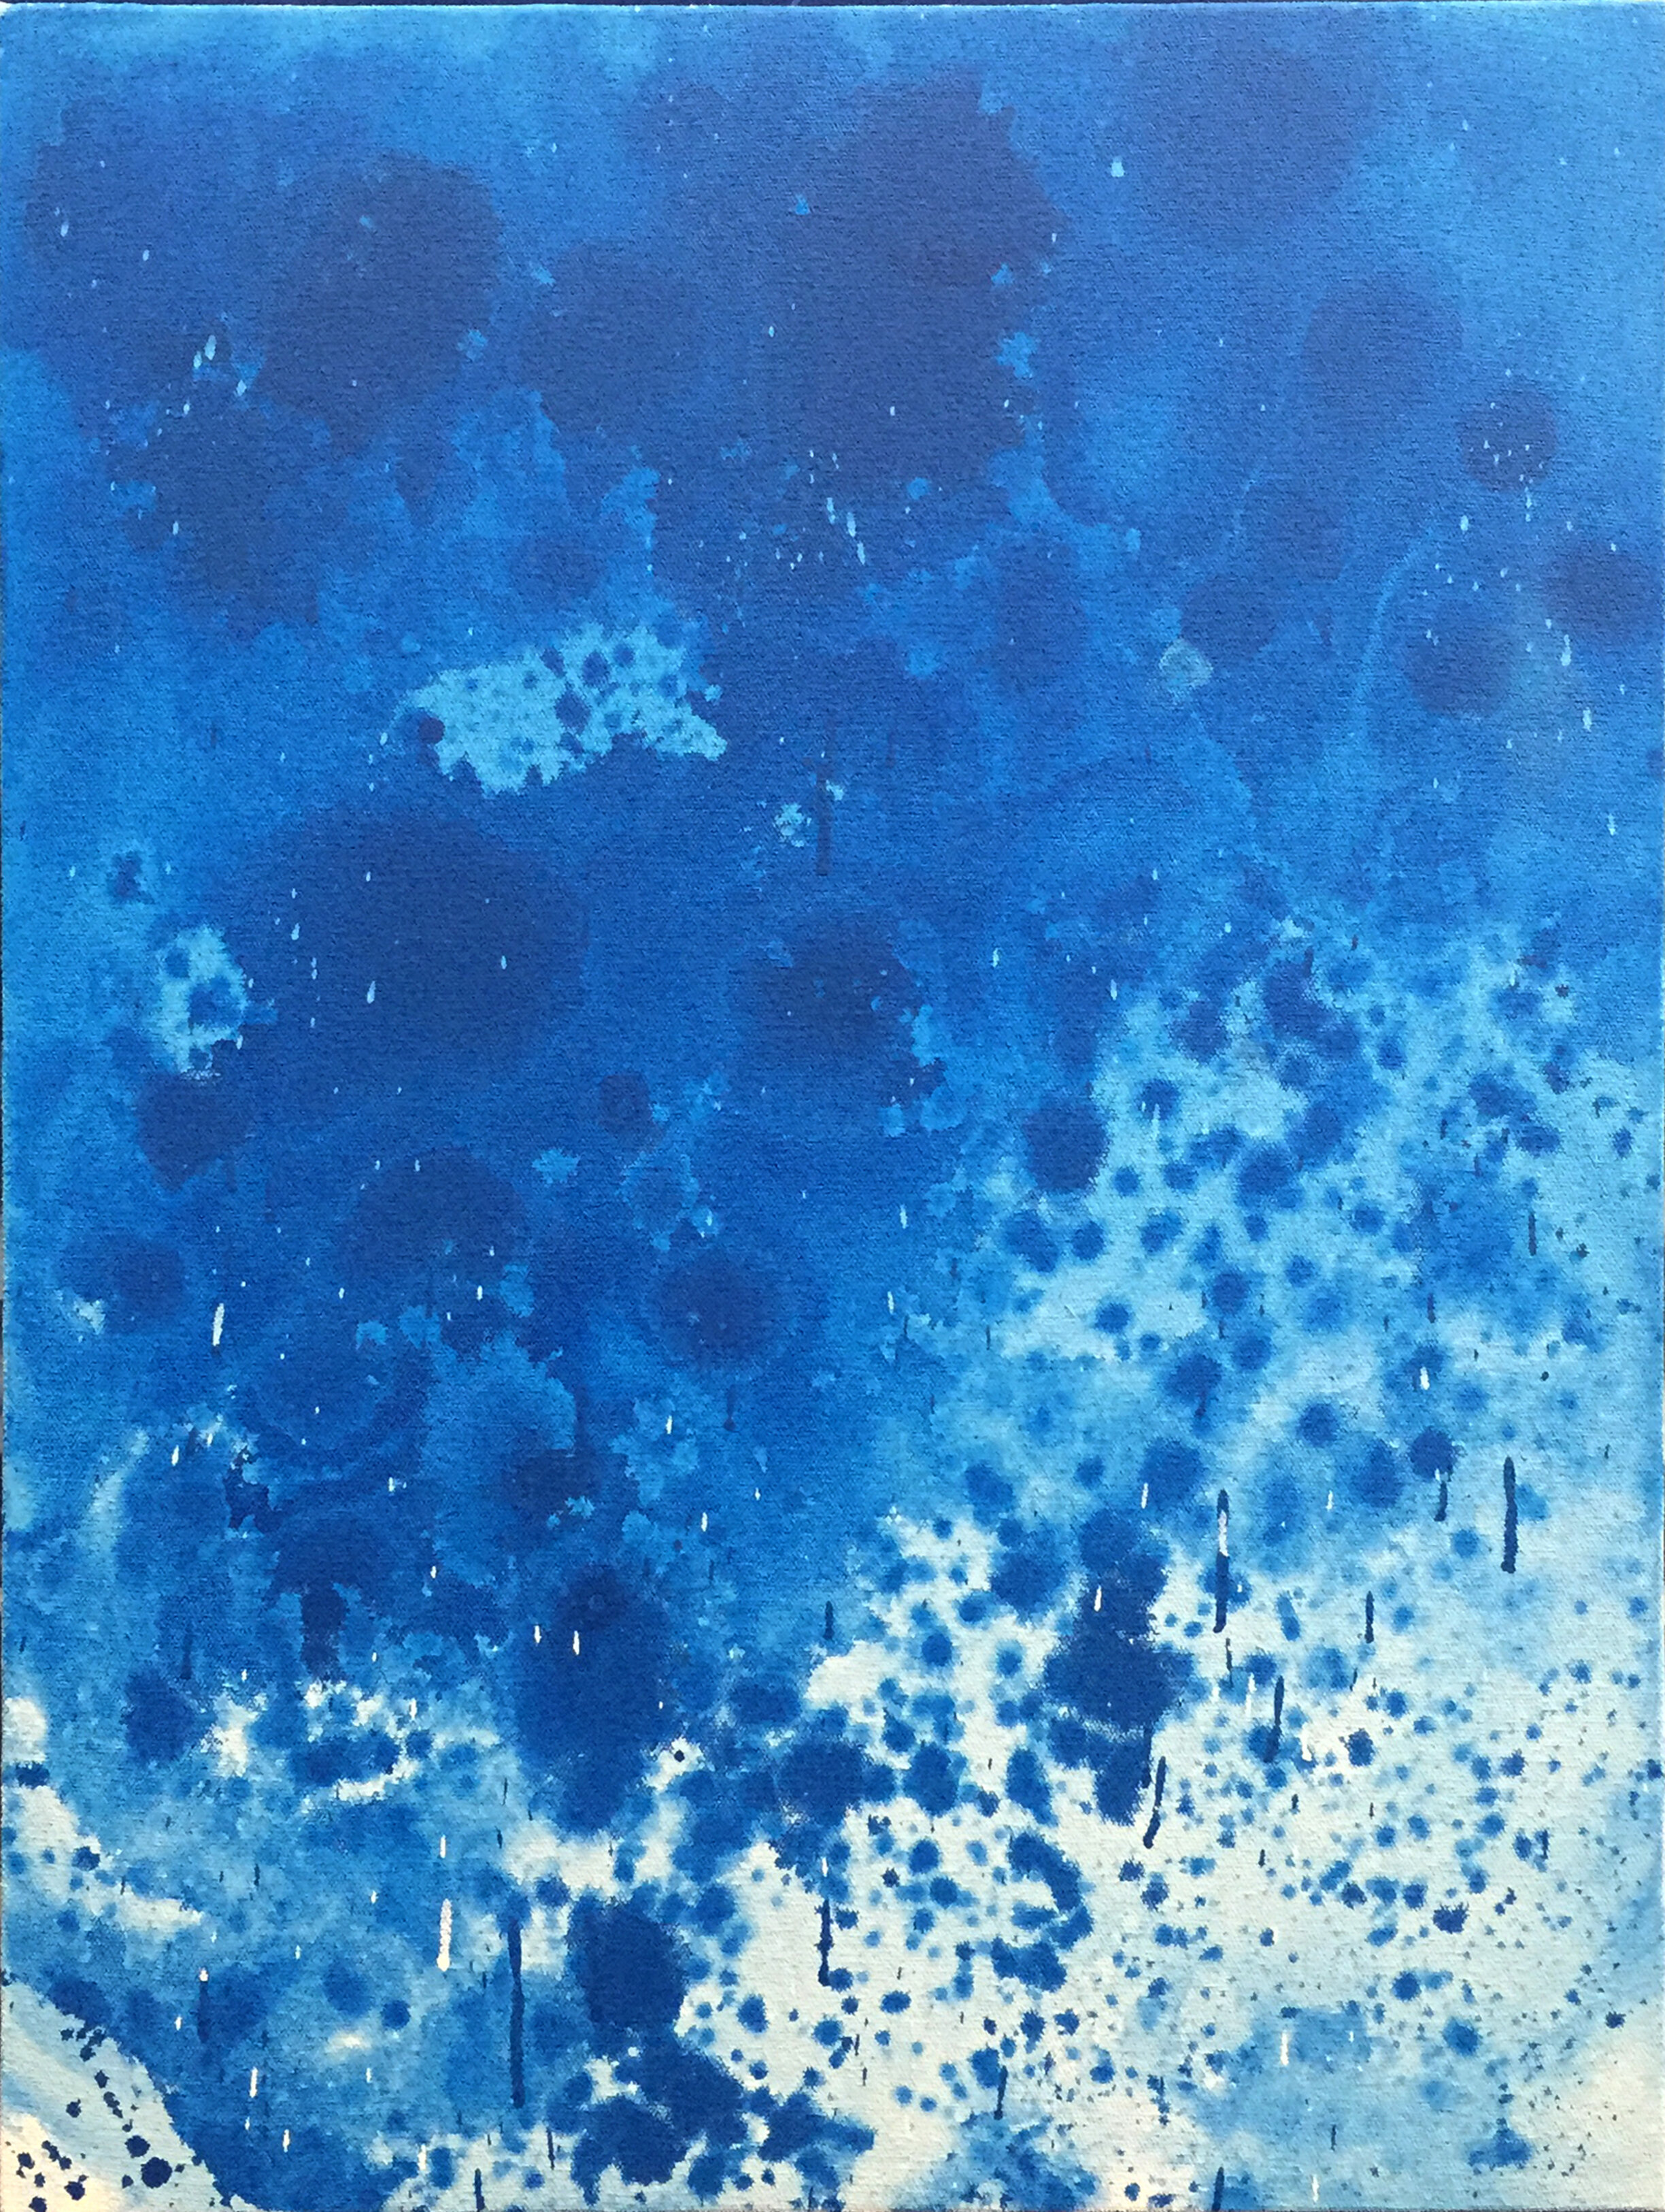   Untitled Painting in Cerulean, 2015.  Acrylic on canvas. 24 x 18 inches 